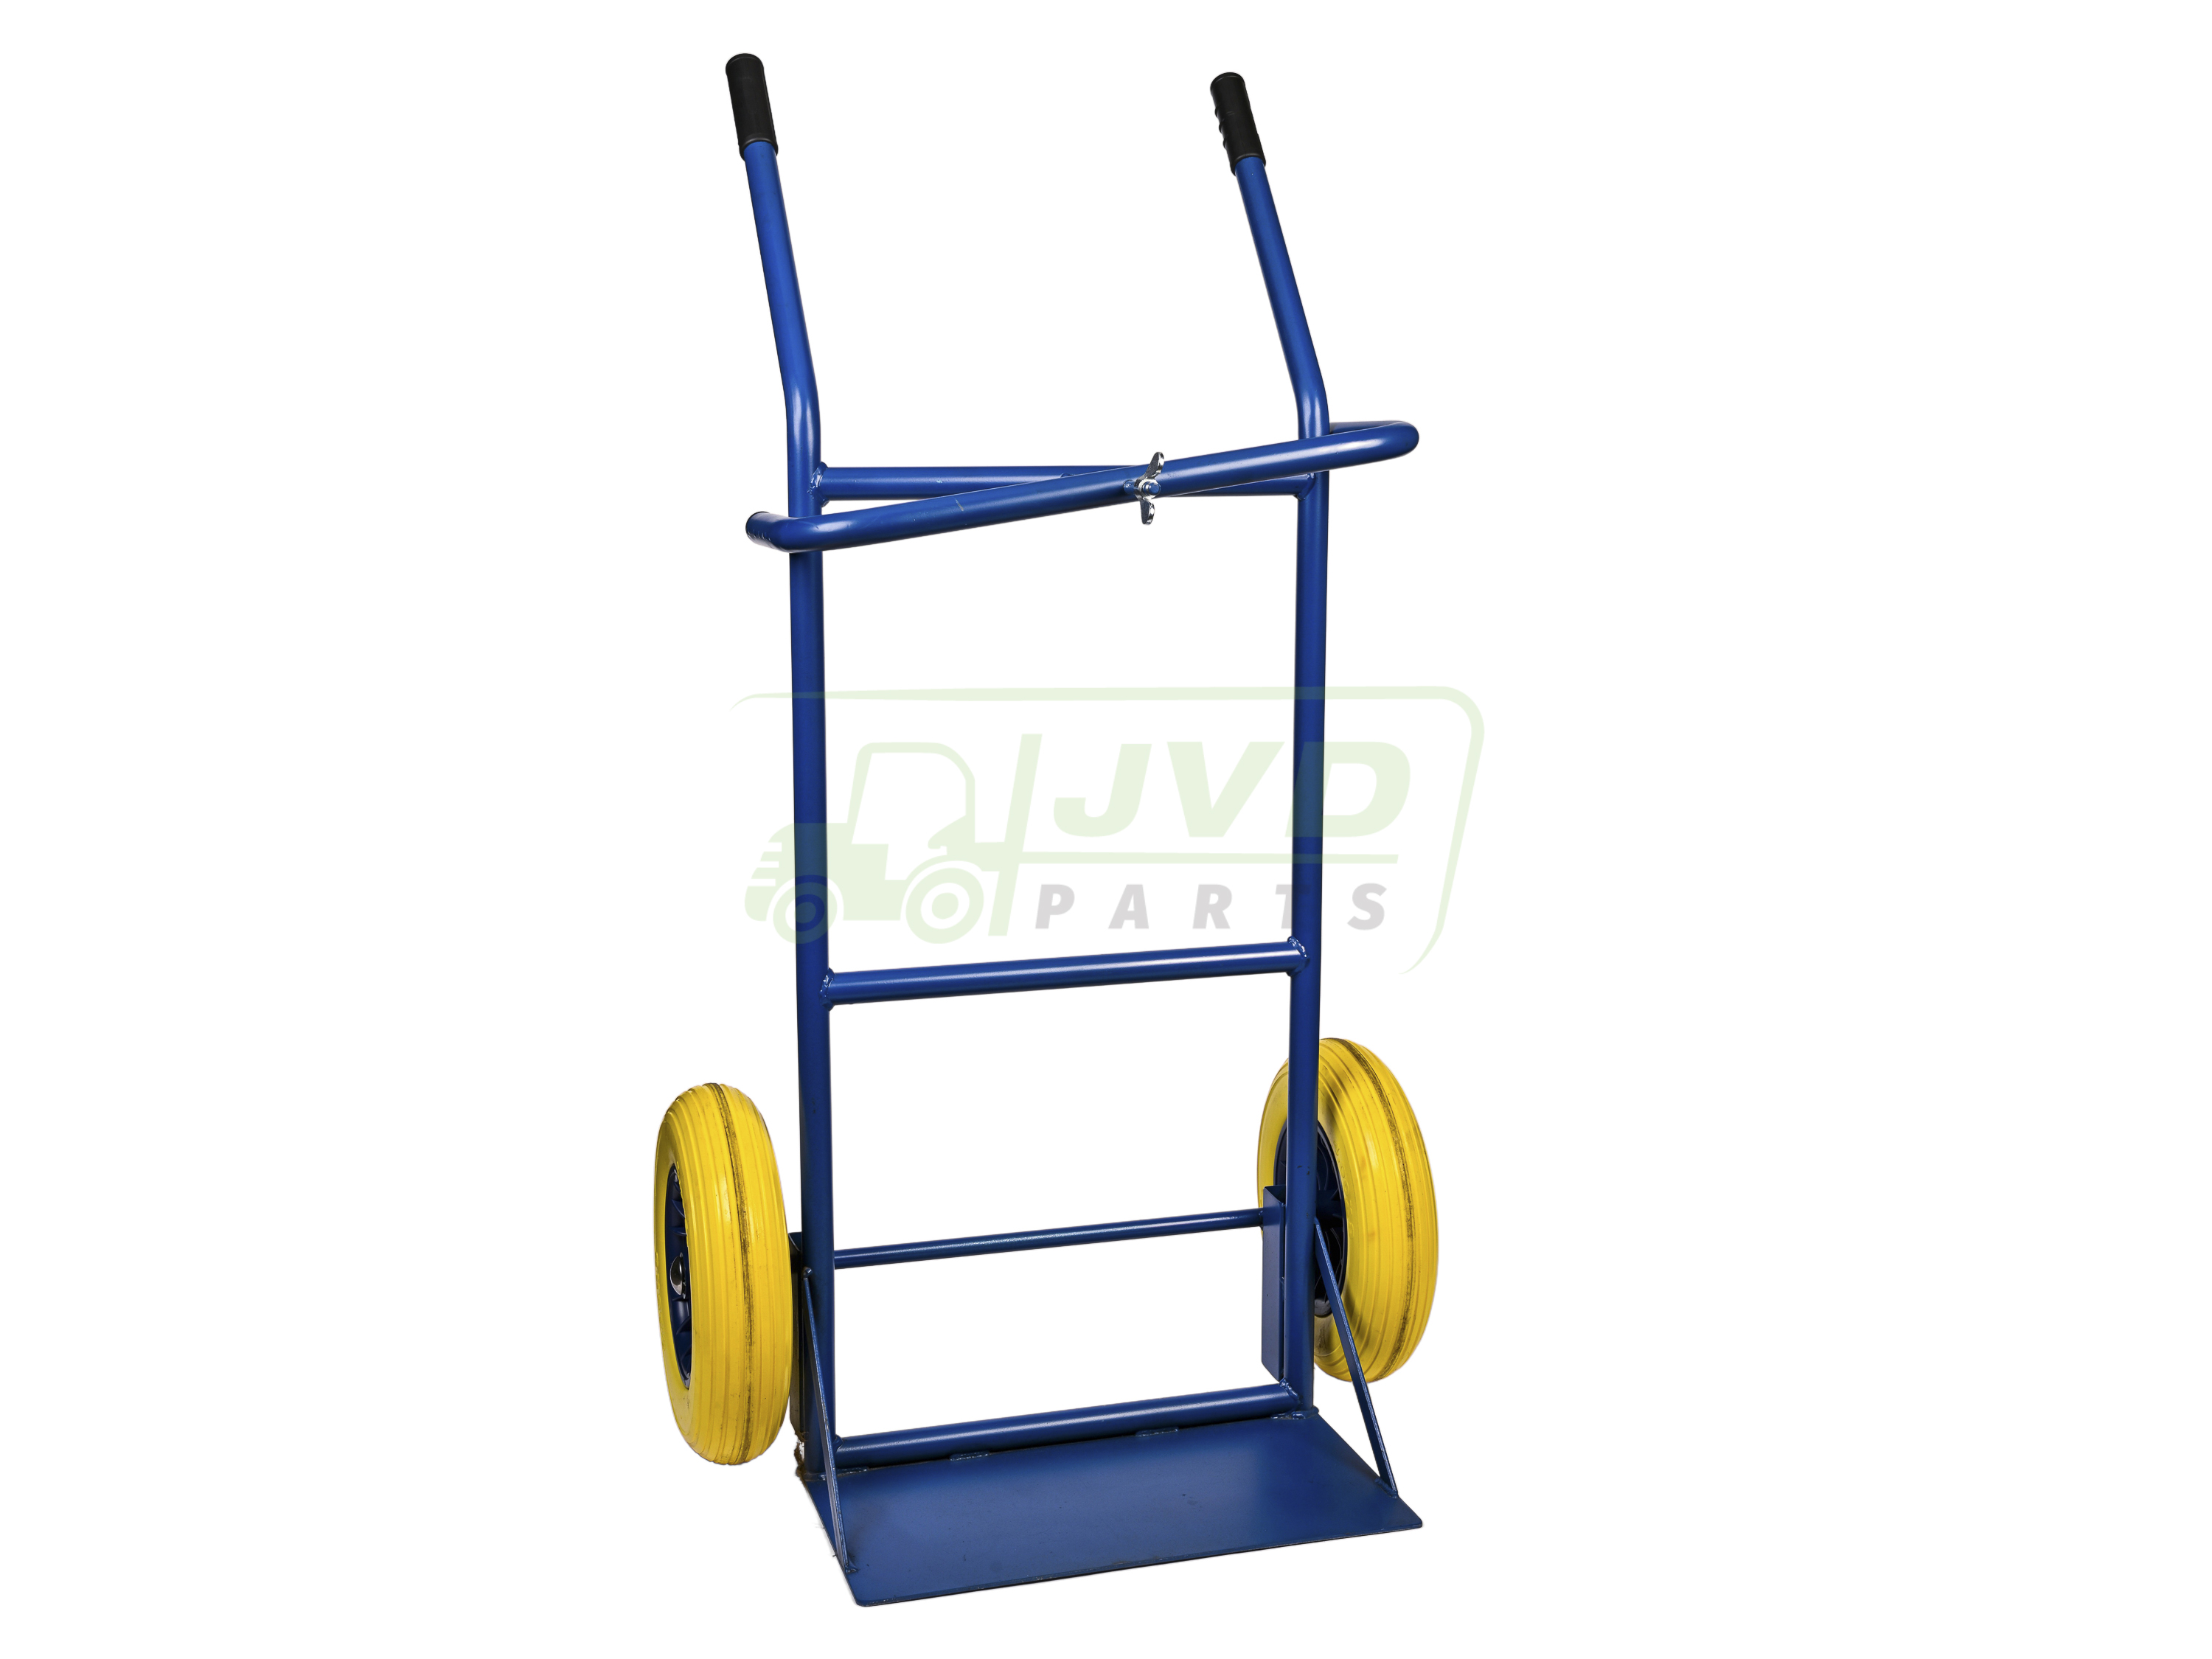 Handtrolley, Height 1500mm - Plate (550x300mm)